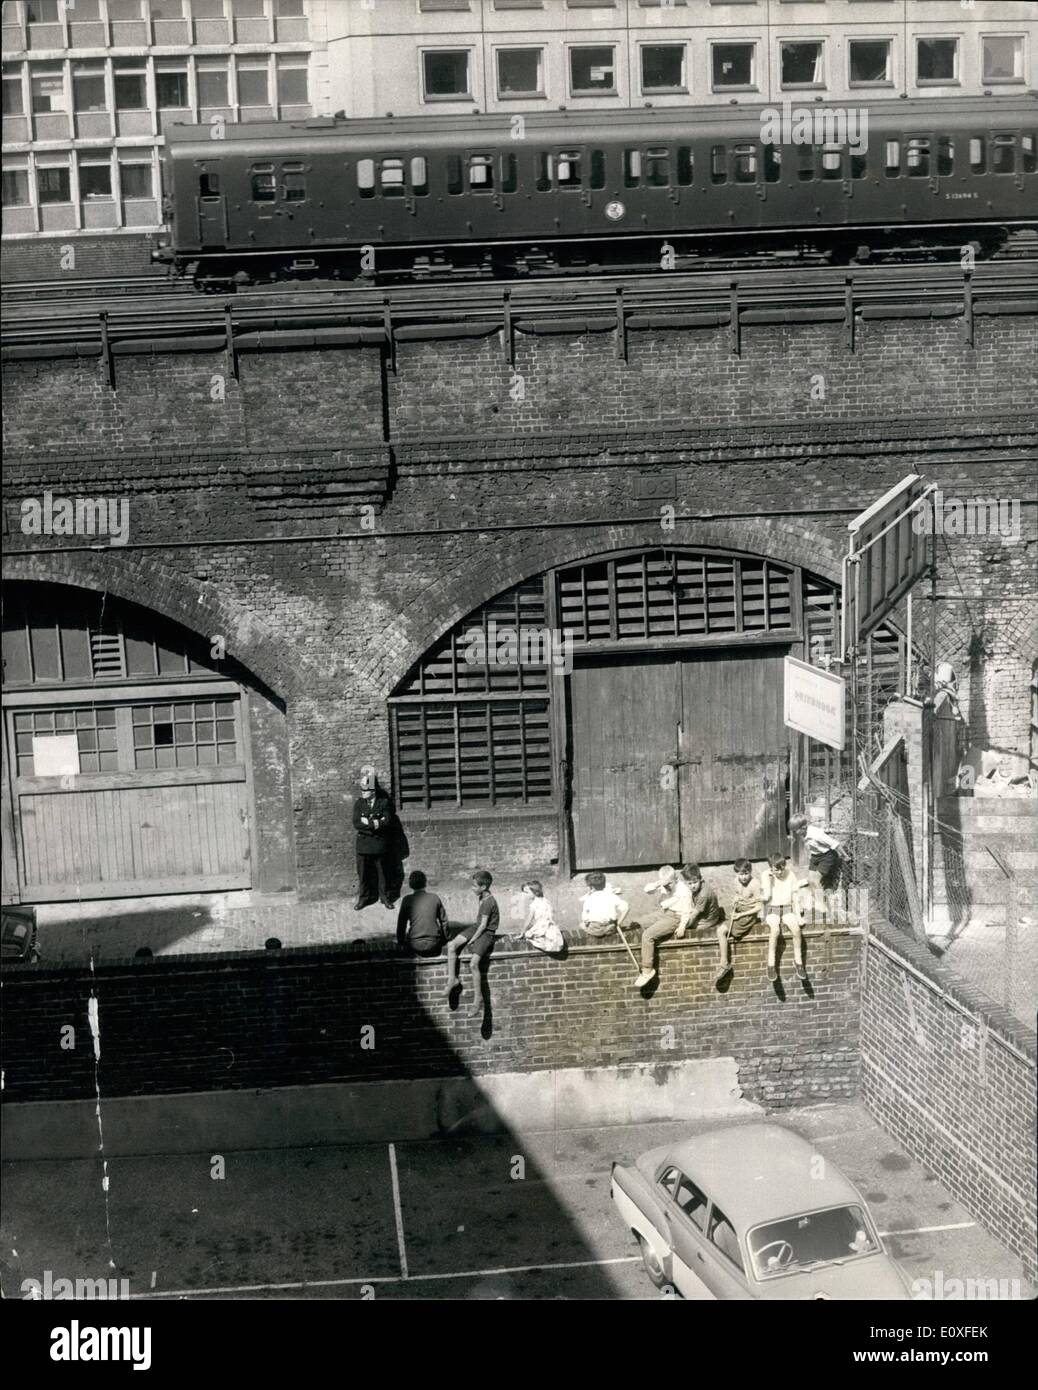 Aug. 08, 1966 - The Munder Car Found in Garage in Tinworth St. Lambert. The car which was used in the shooting of the tree London Policemen of Friday afternoon in Braybrook St. Shepherd's Bush was found early this morning in a Garage under a Railway Arch in Tinworth Street, Lambeth. The police were informed by Mrs. Elizabeth Pentlin who resides in a block of flats overlooking the garage, she told the police that she saw the car being driven into the garage about 4 o'clock in Friday afternoon which was about 30 mins after the killing of the tree policemen Stock Photo